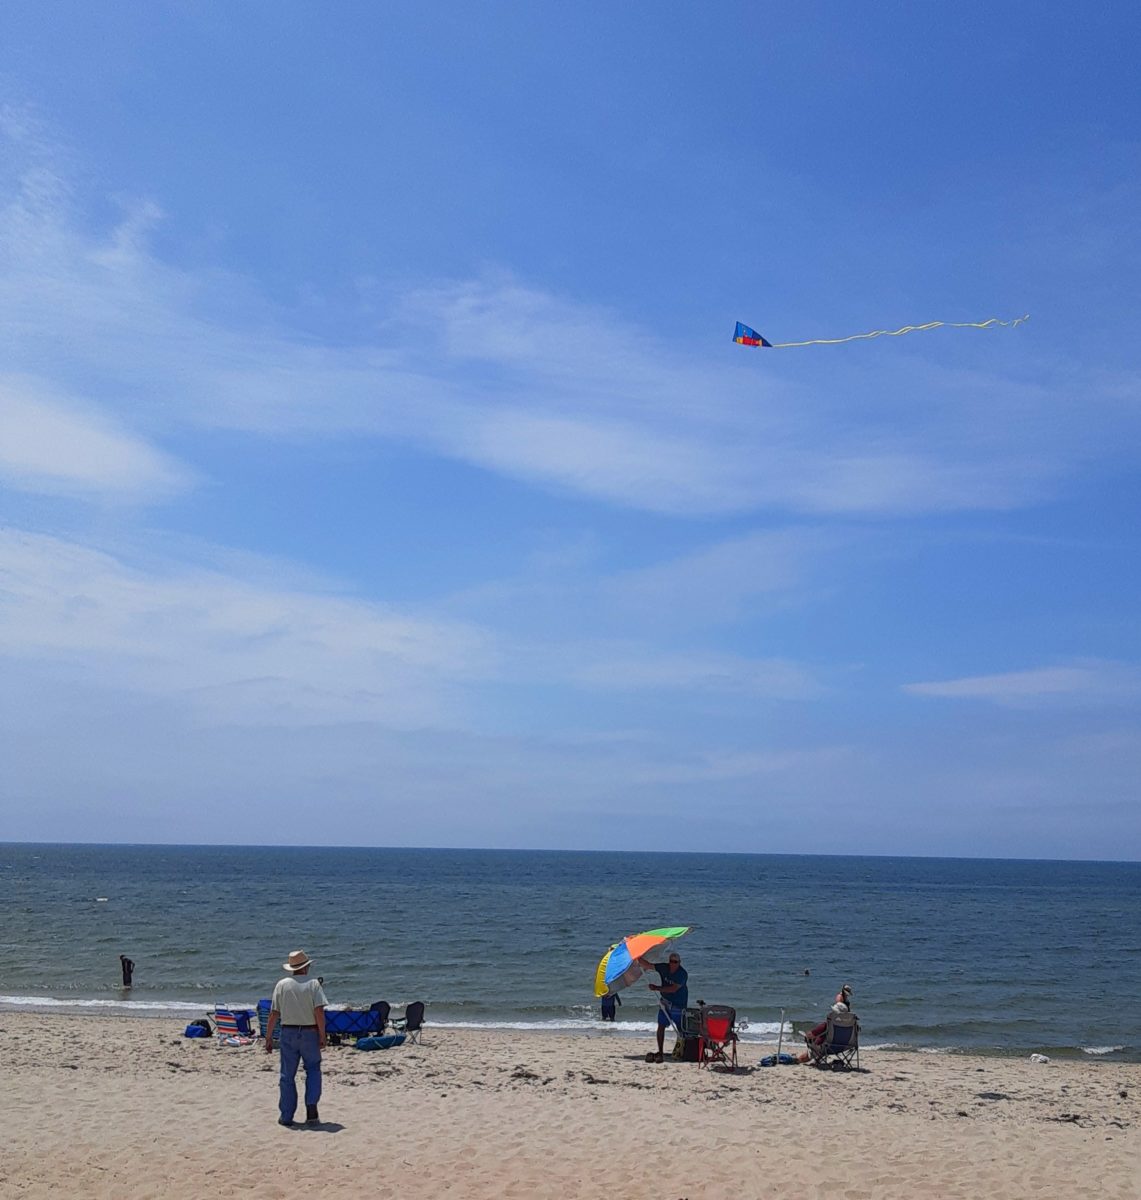 People are flying a kite on the beach